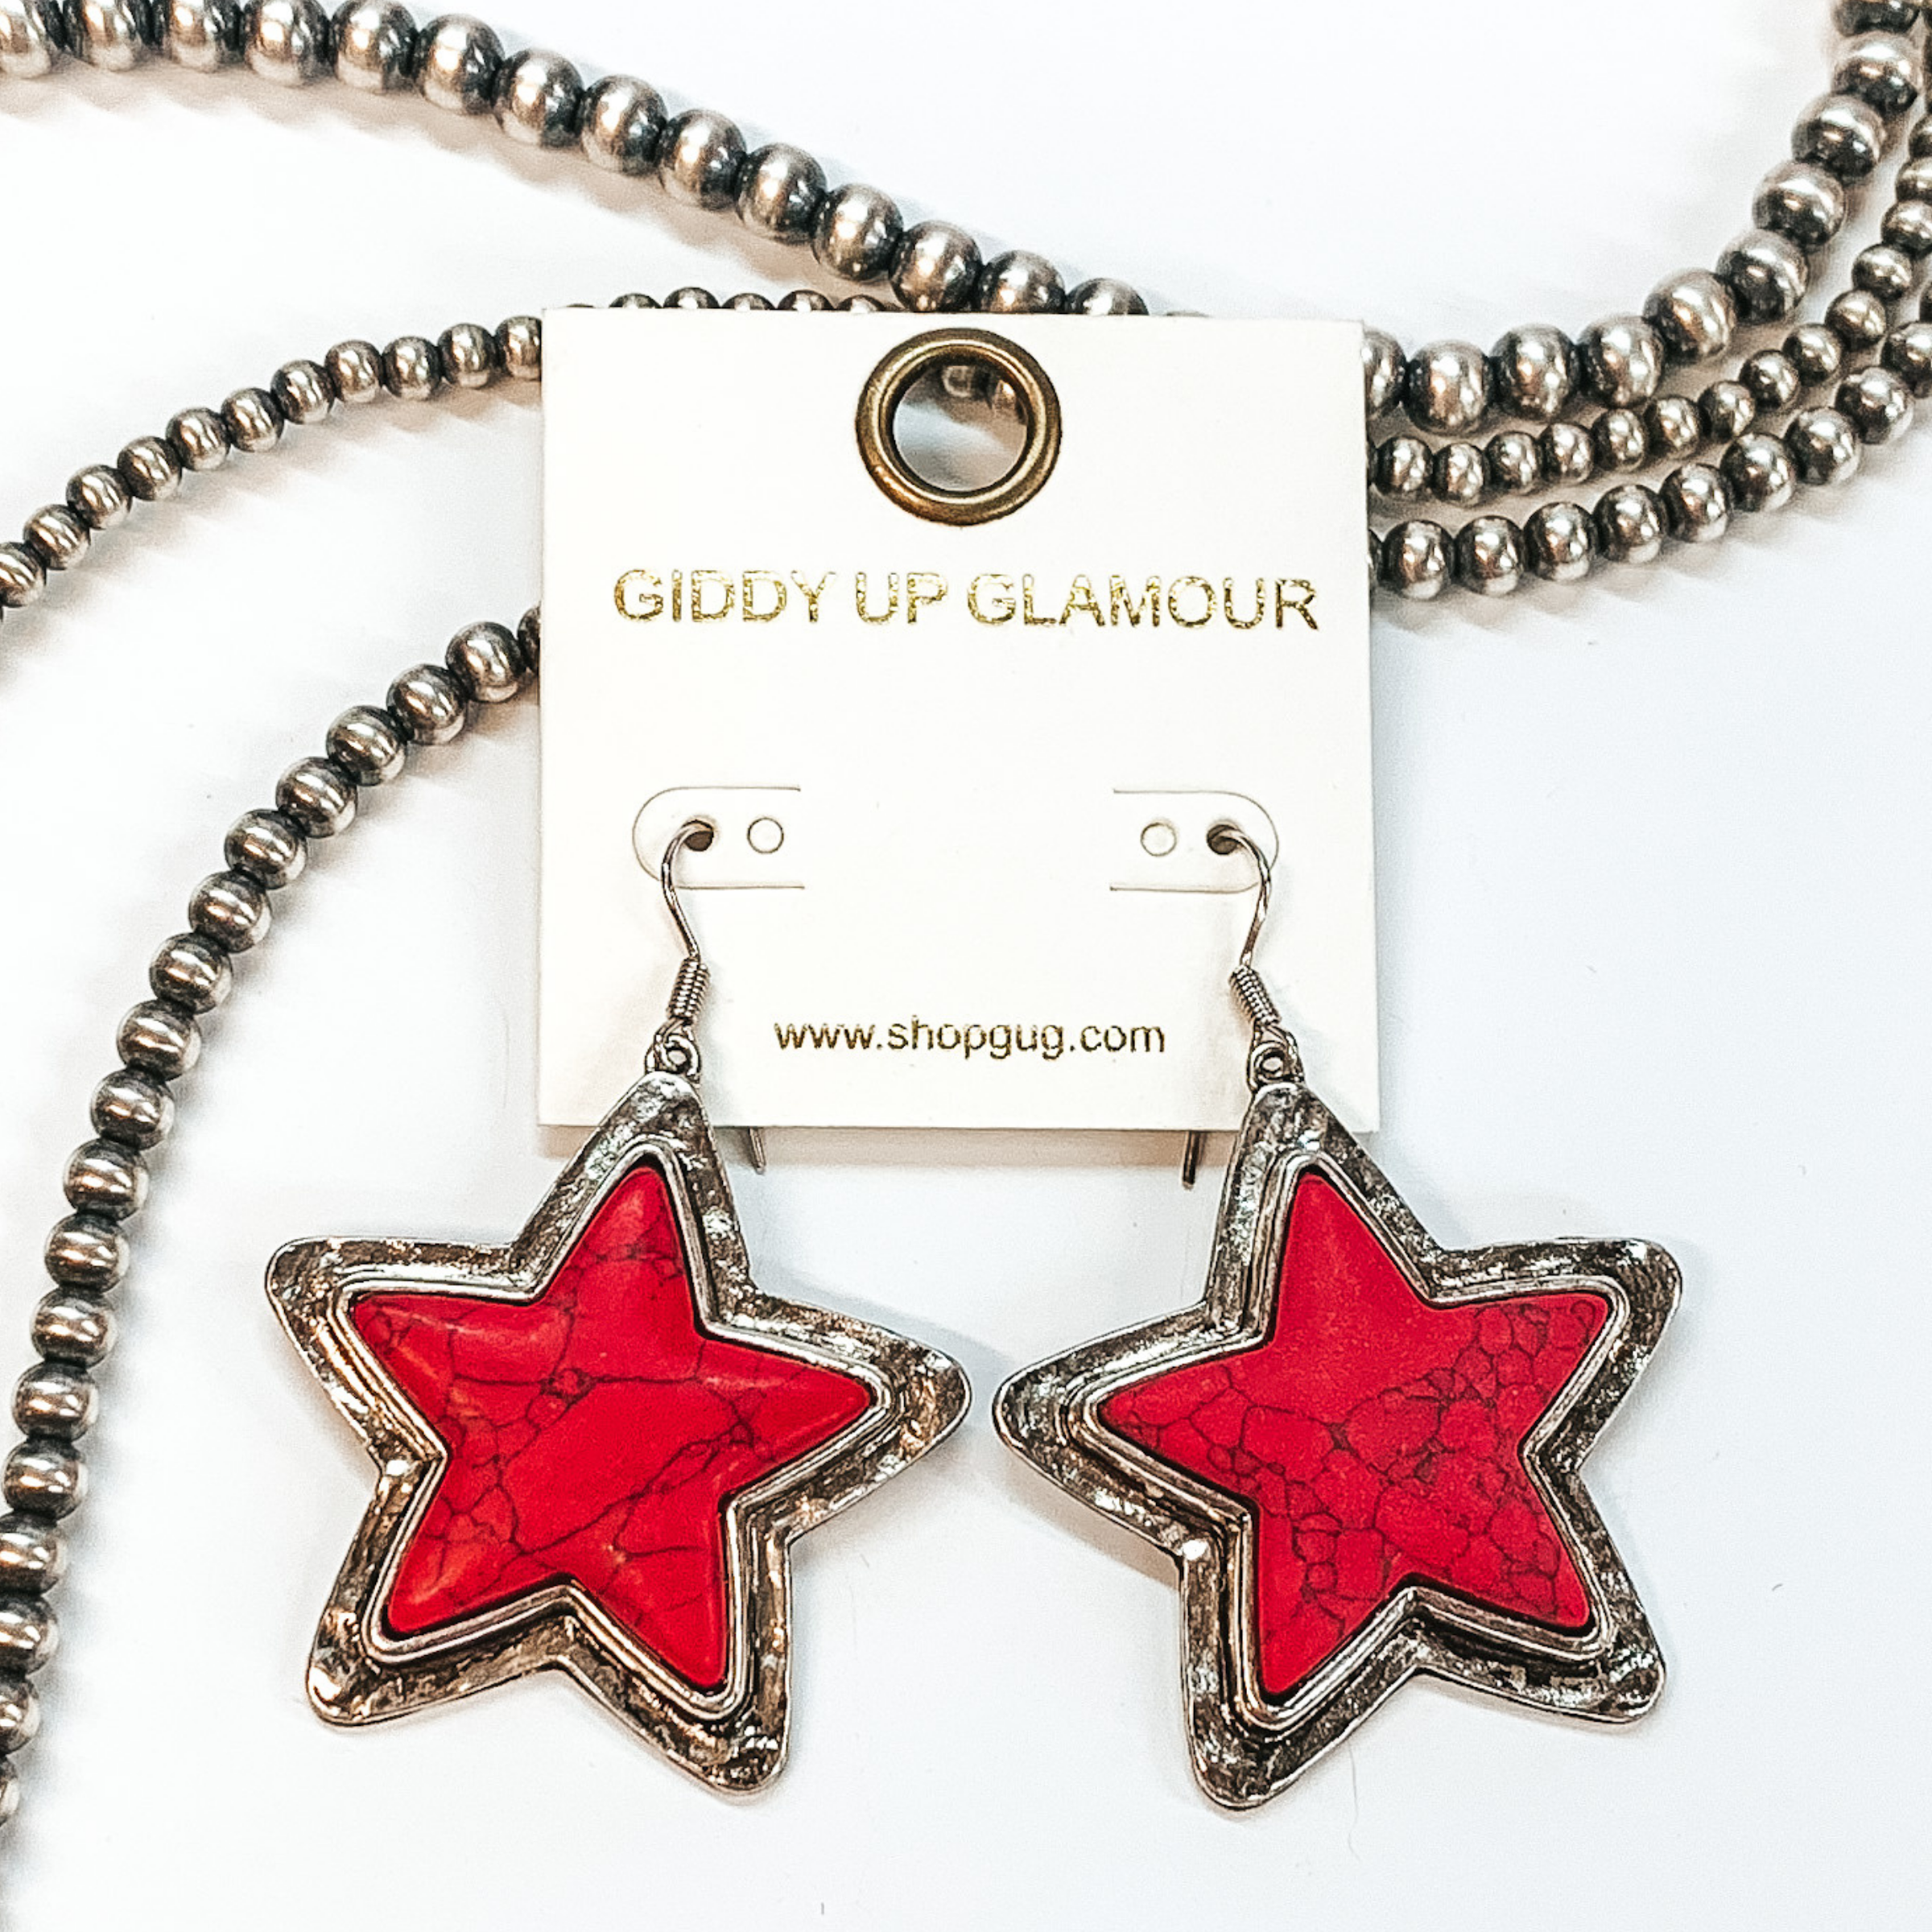 Red stone star dangling earrings with silver lining, pictured on a white background and beaded decor.  